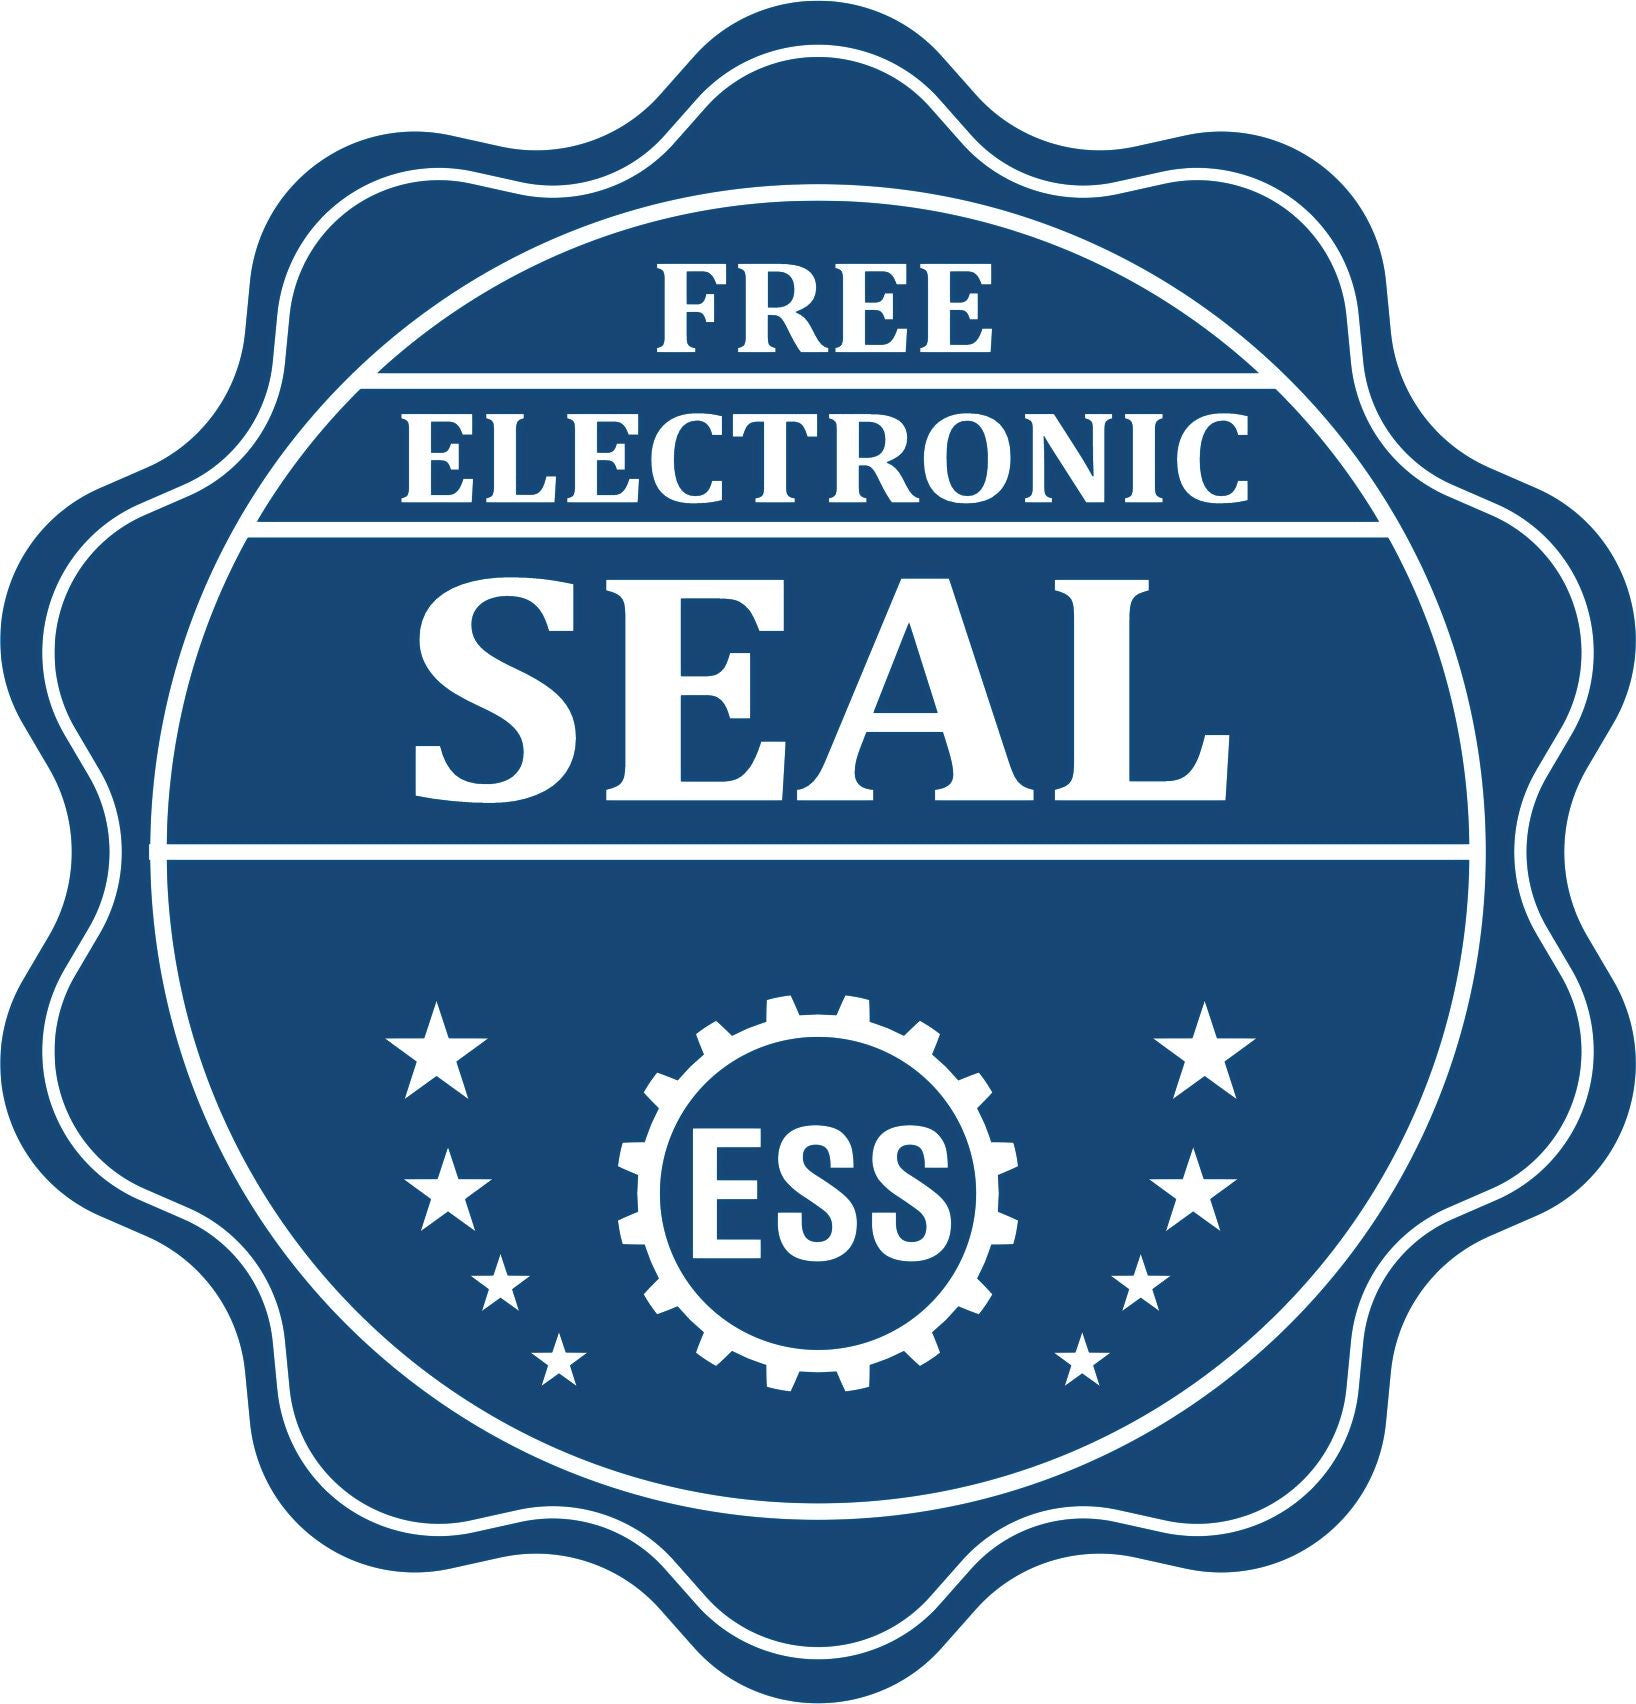 A badge showing a free electronic seal for the Gift Kansas Landscape Architect Seal with stars and the ESS gear on the emblem.